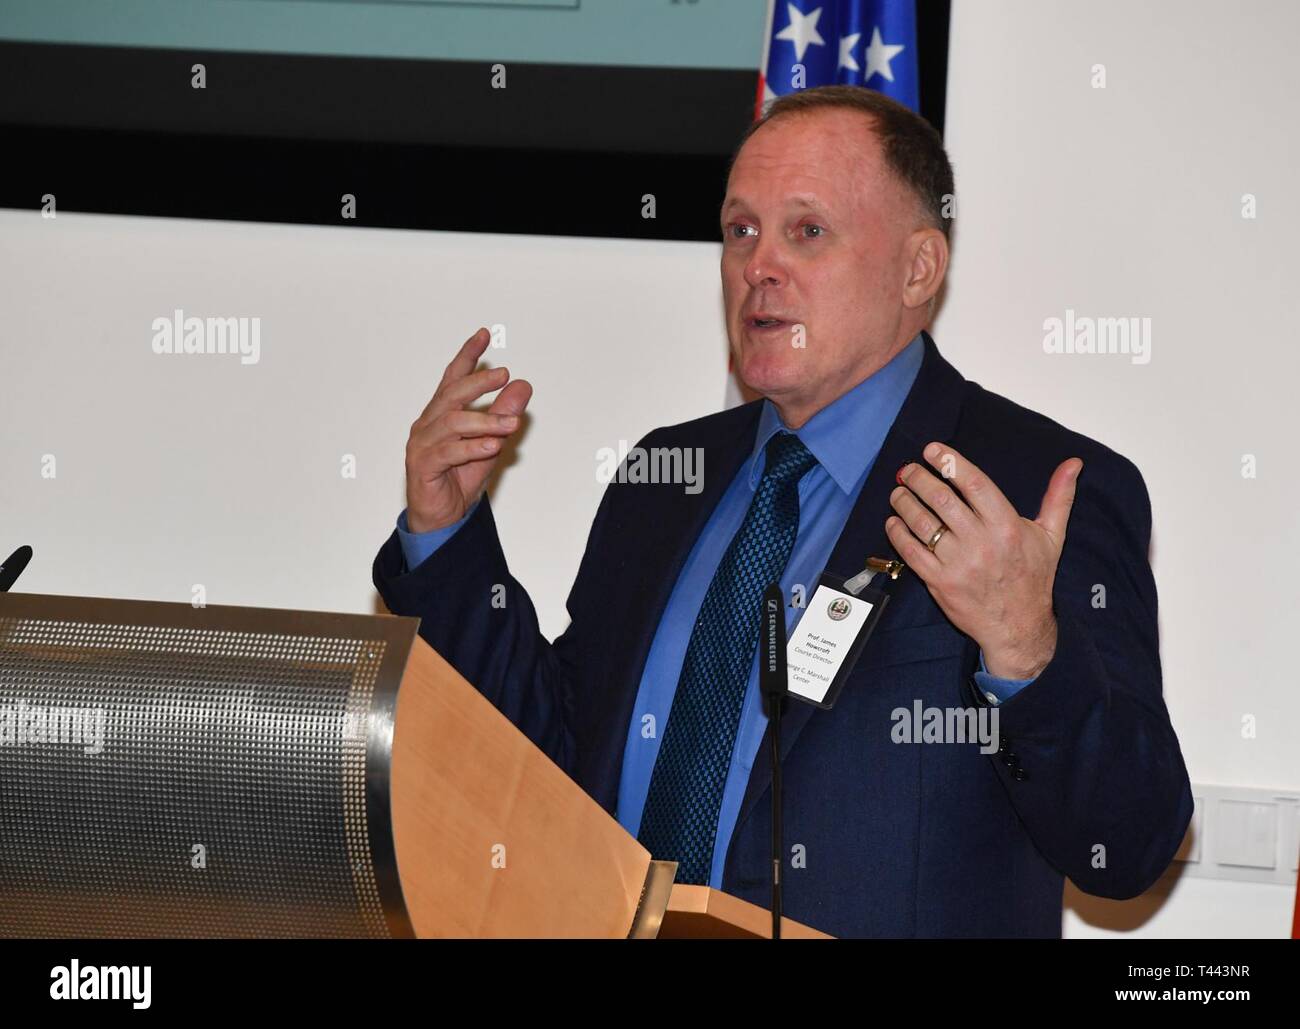 GARMISCH-PARTENKIRCHEN, Germany (March 13, 2019) – Retired U.S. Marine Corps Col. James Howcroft, program director for the Program on Terrorism and Security Studies at the George C. Marshall European Center for Security Studies, gives a course overview to the 63 participants from 47 countries attending PTSS 19-07 here March 13. Stock Photo